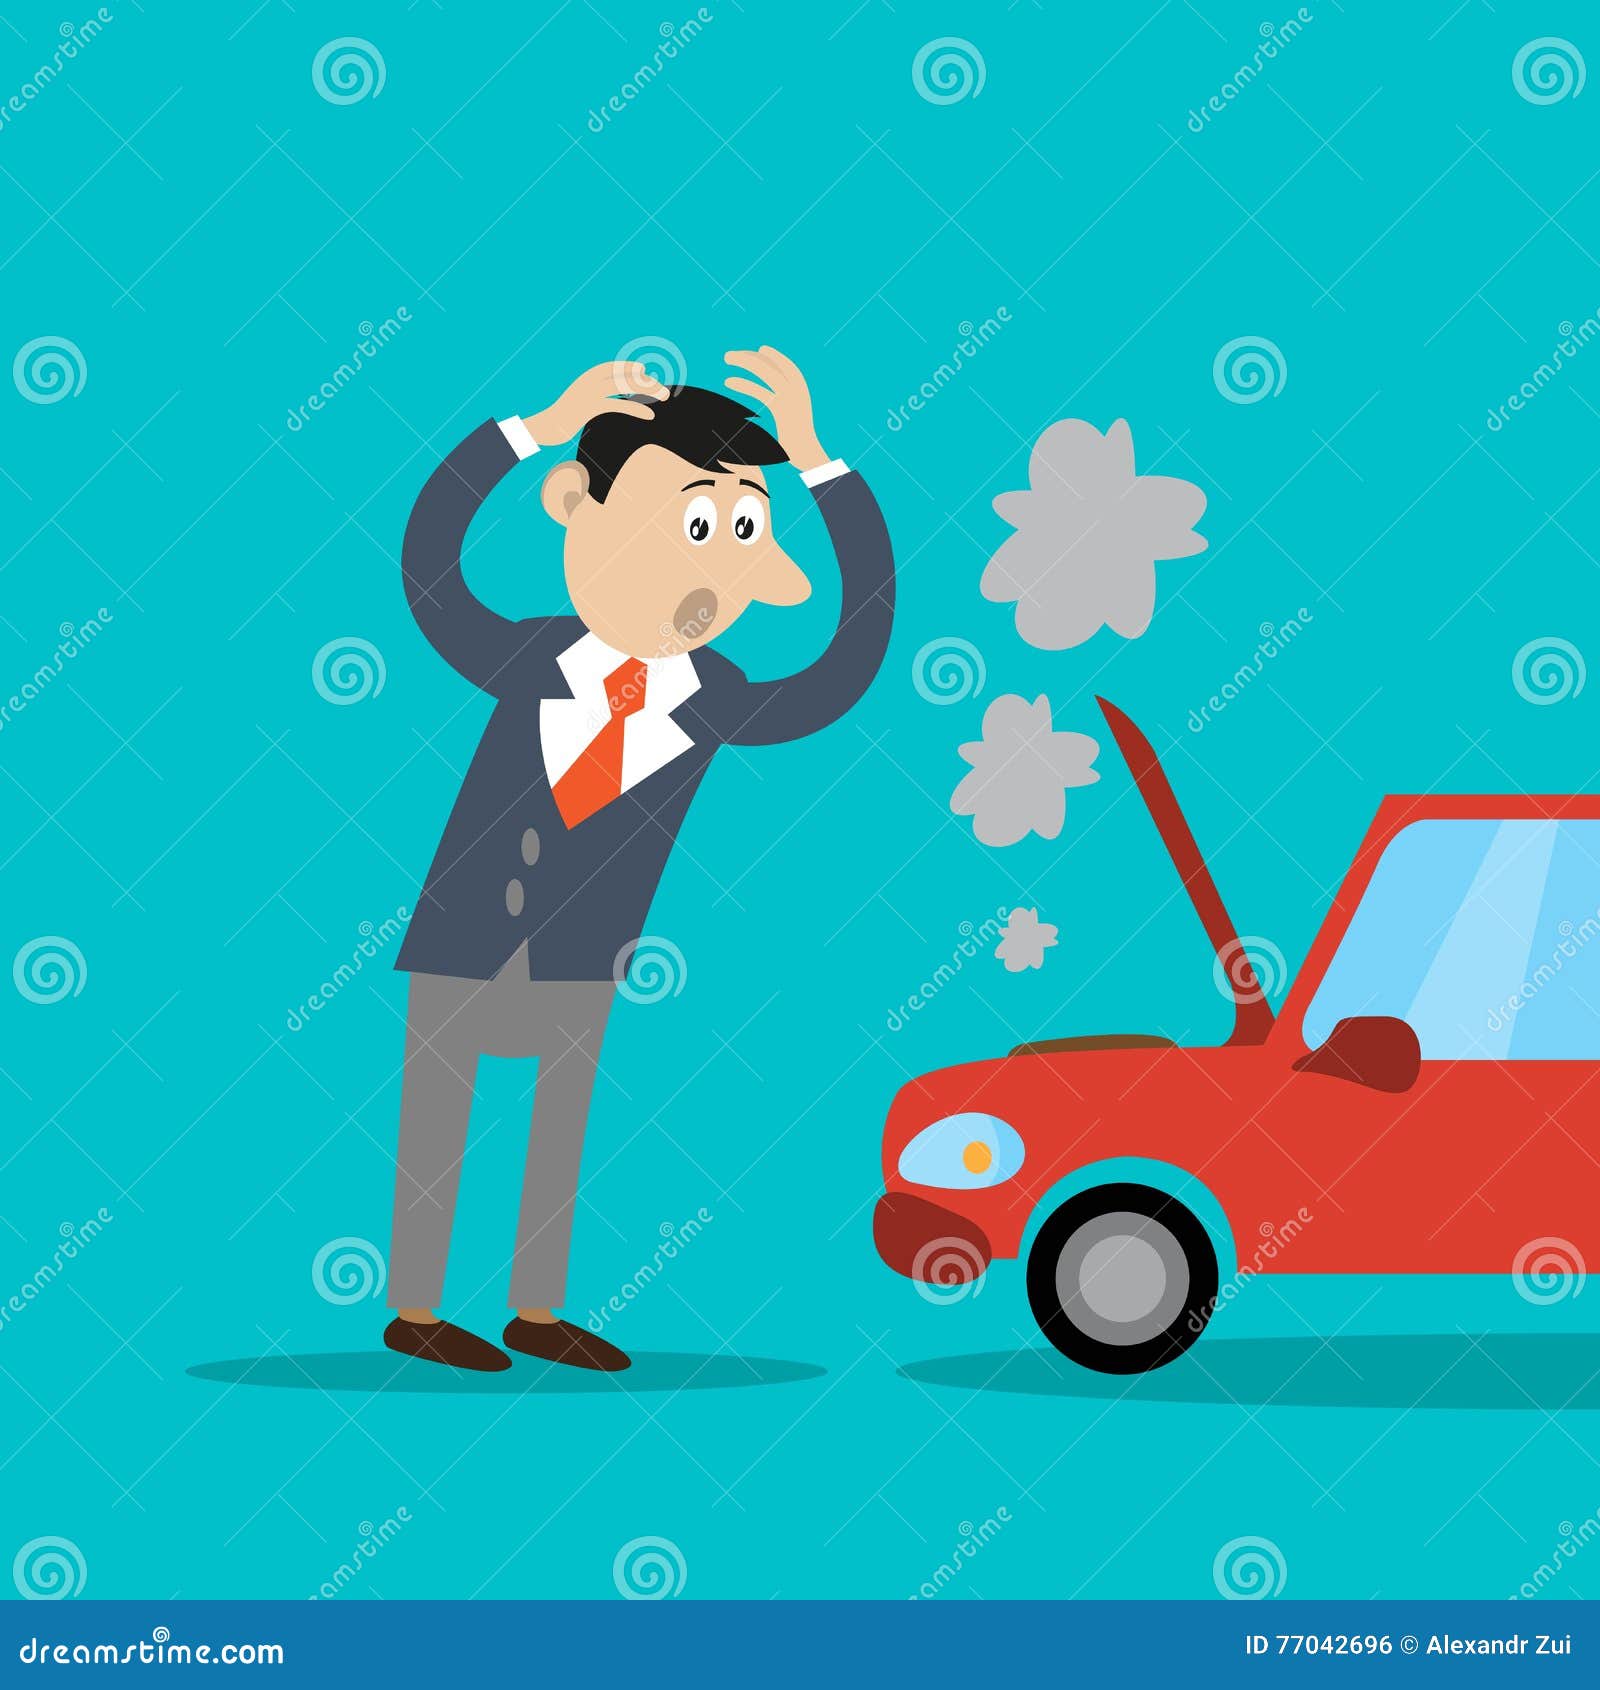 Premium Vector  Illustration showing car crash with two people standing  near the cars